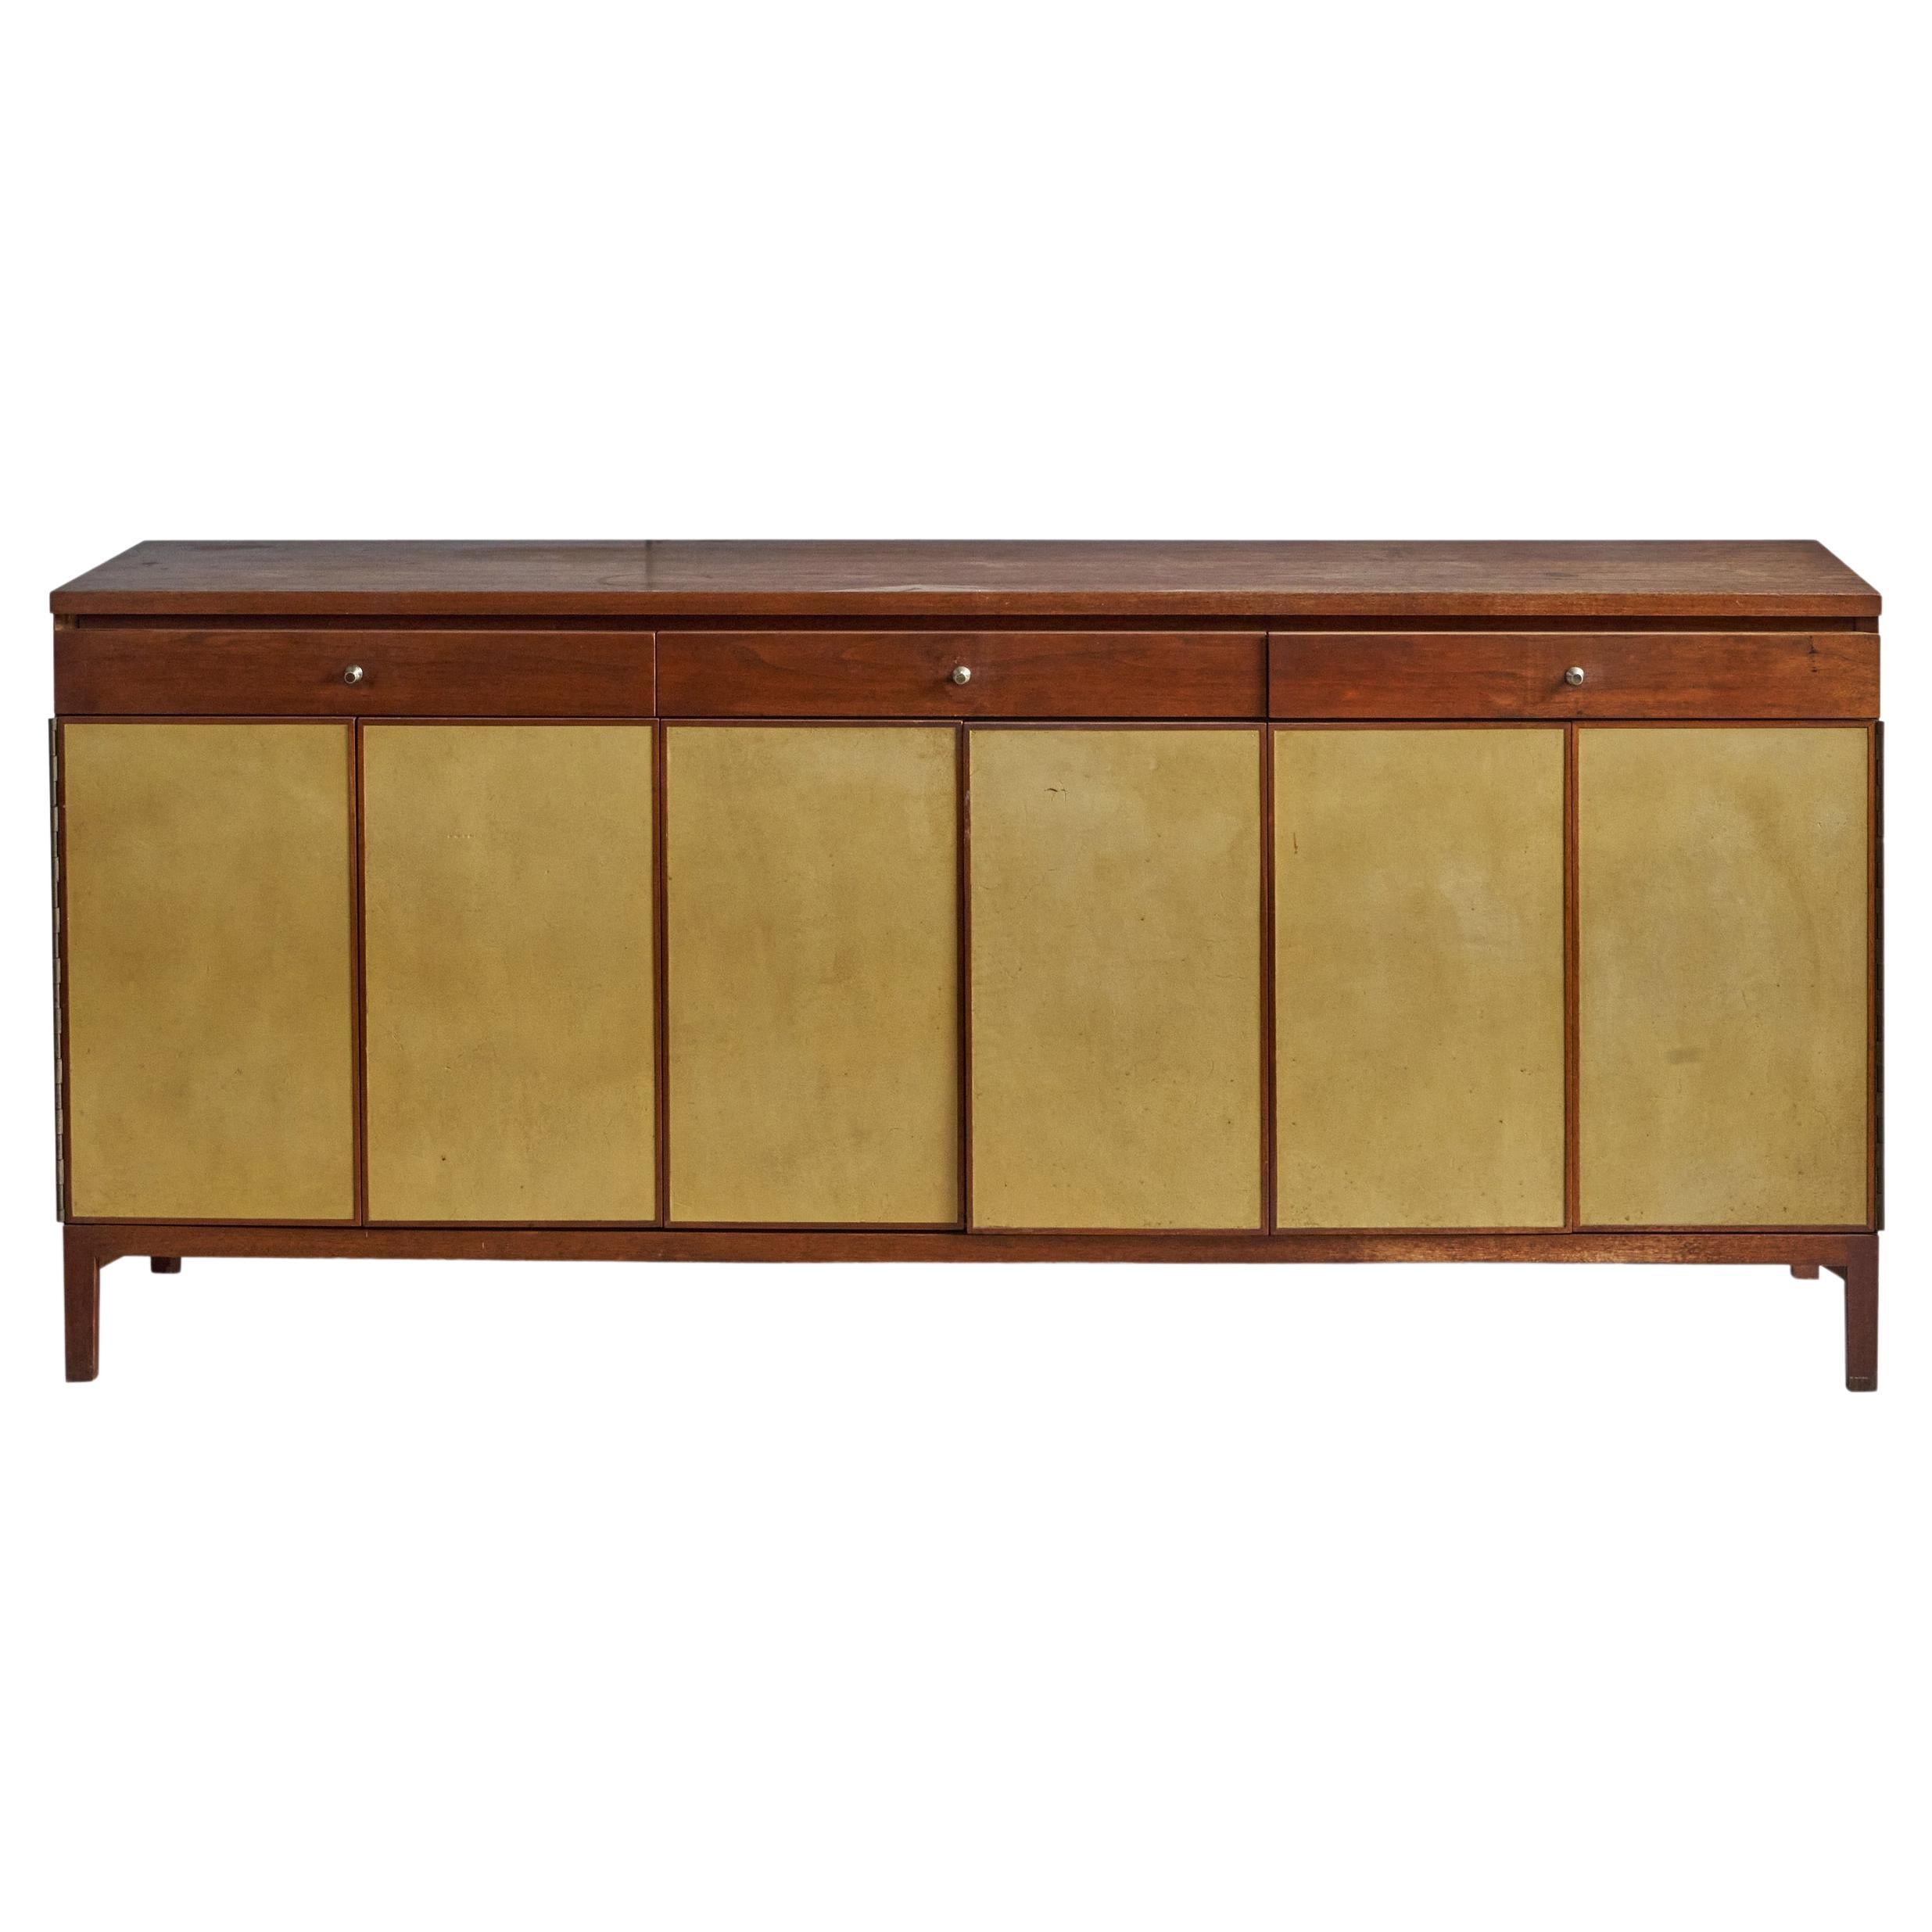 Paul Mccobb, Cabinet, Walnut, Leather, Metal, USA, 1950s For Sale